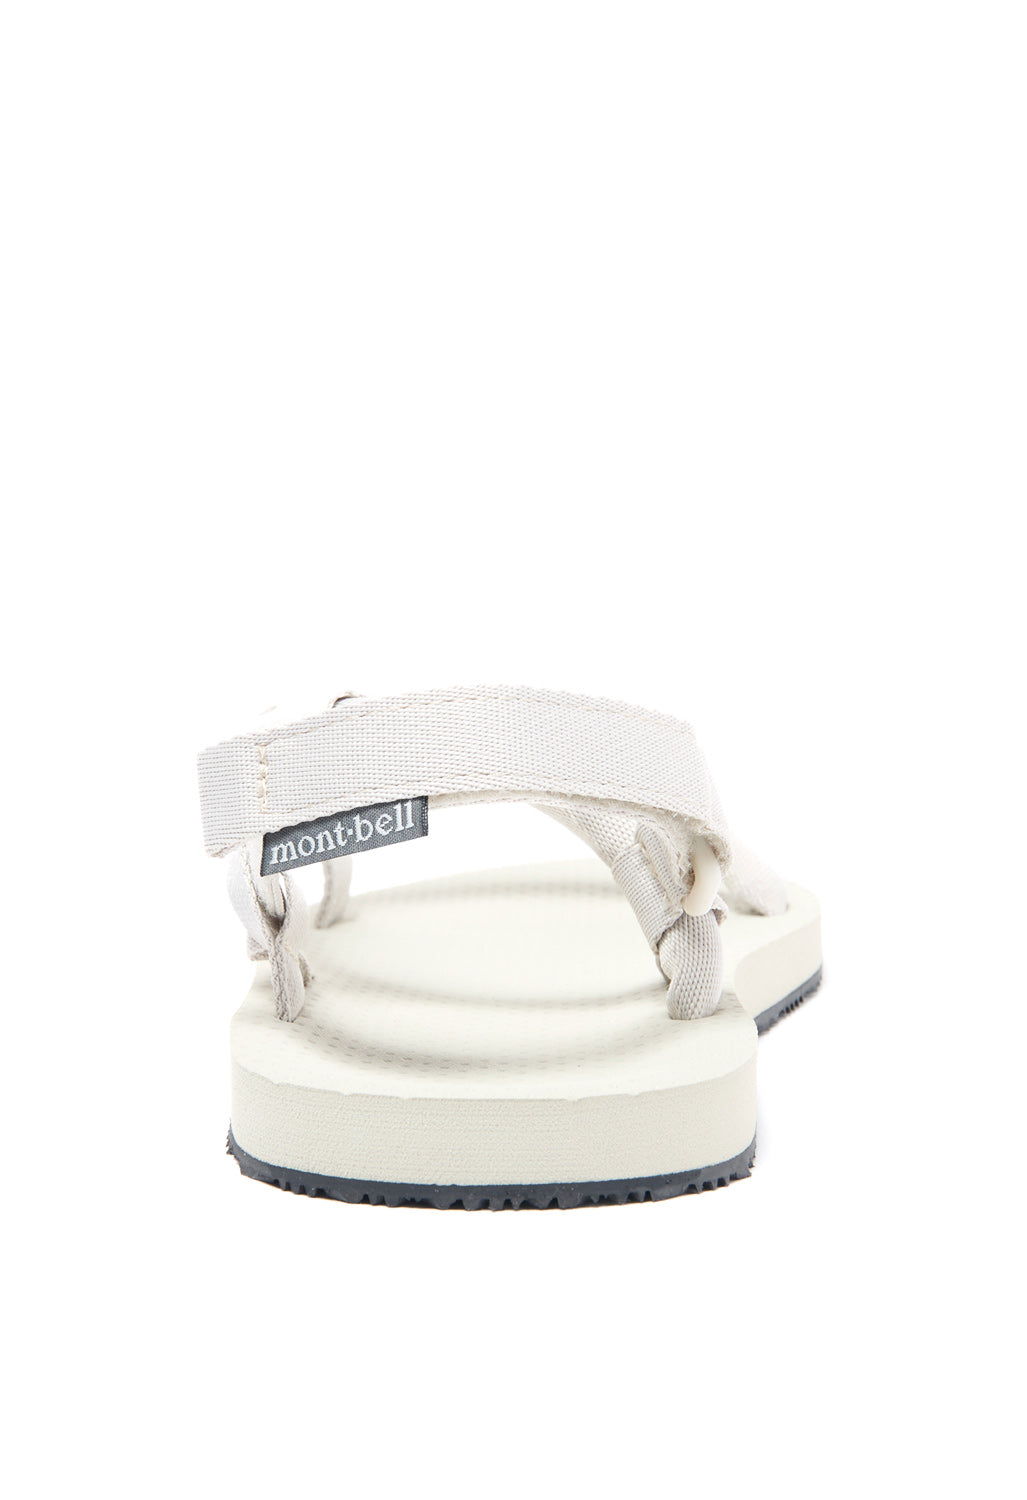 Montbell Lock-On Sandals - Ivory